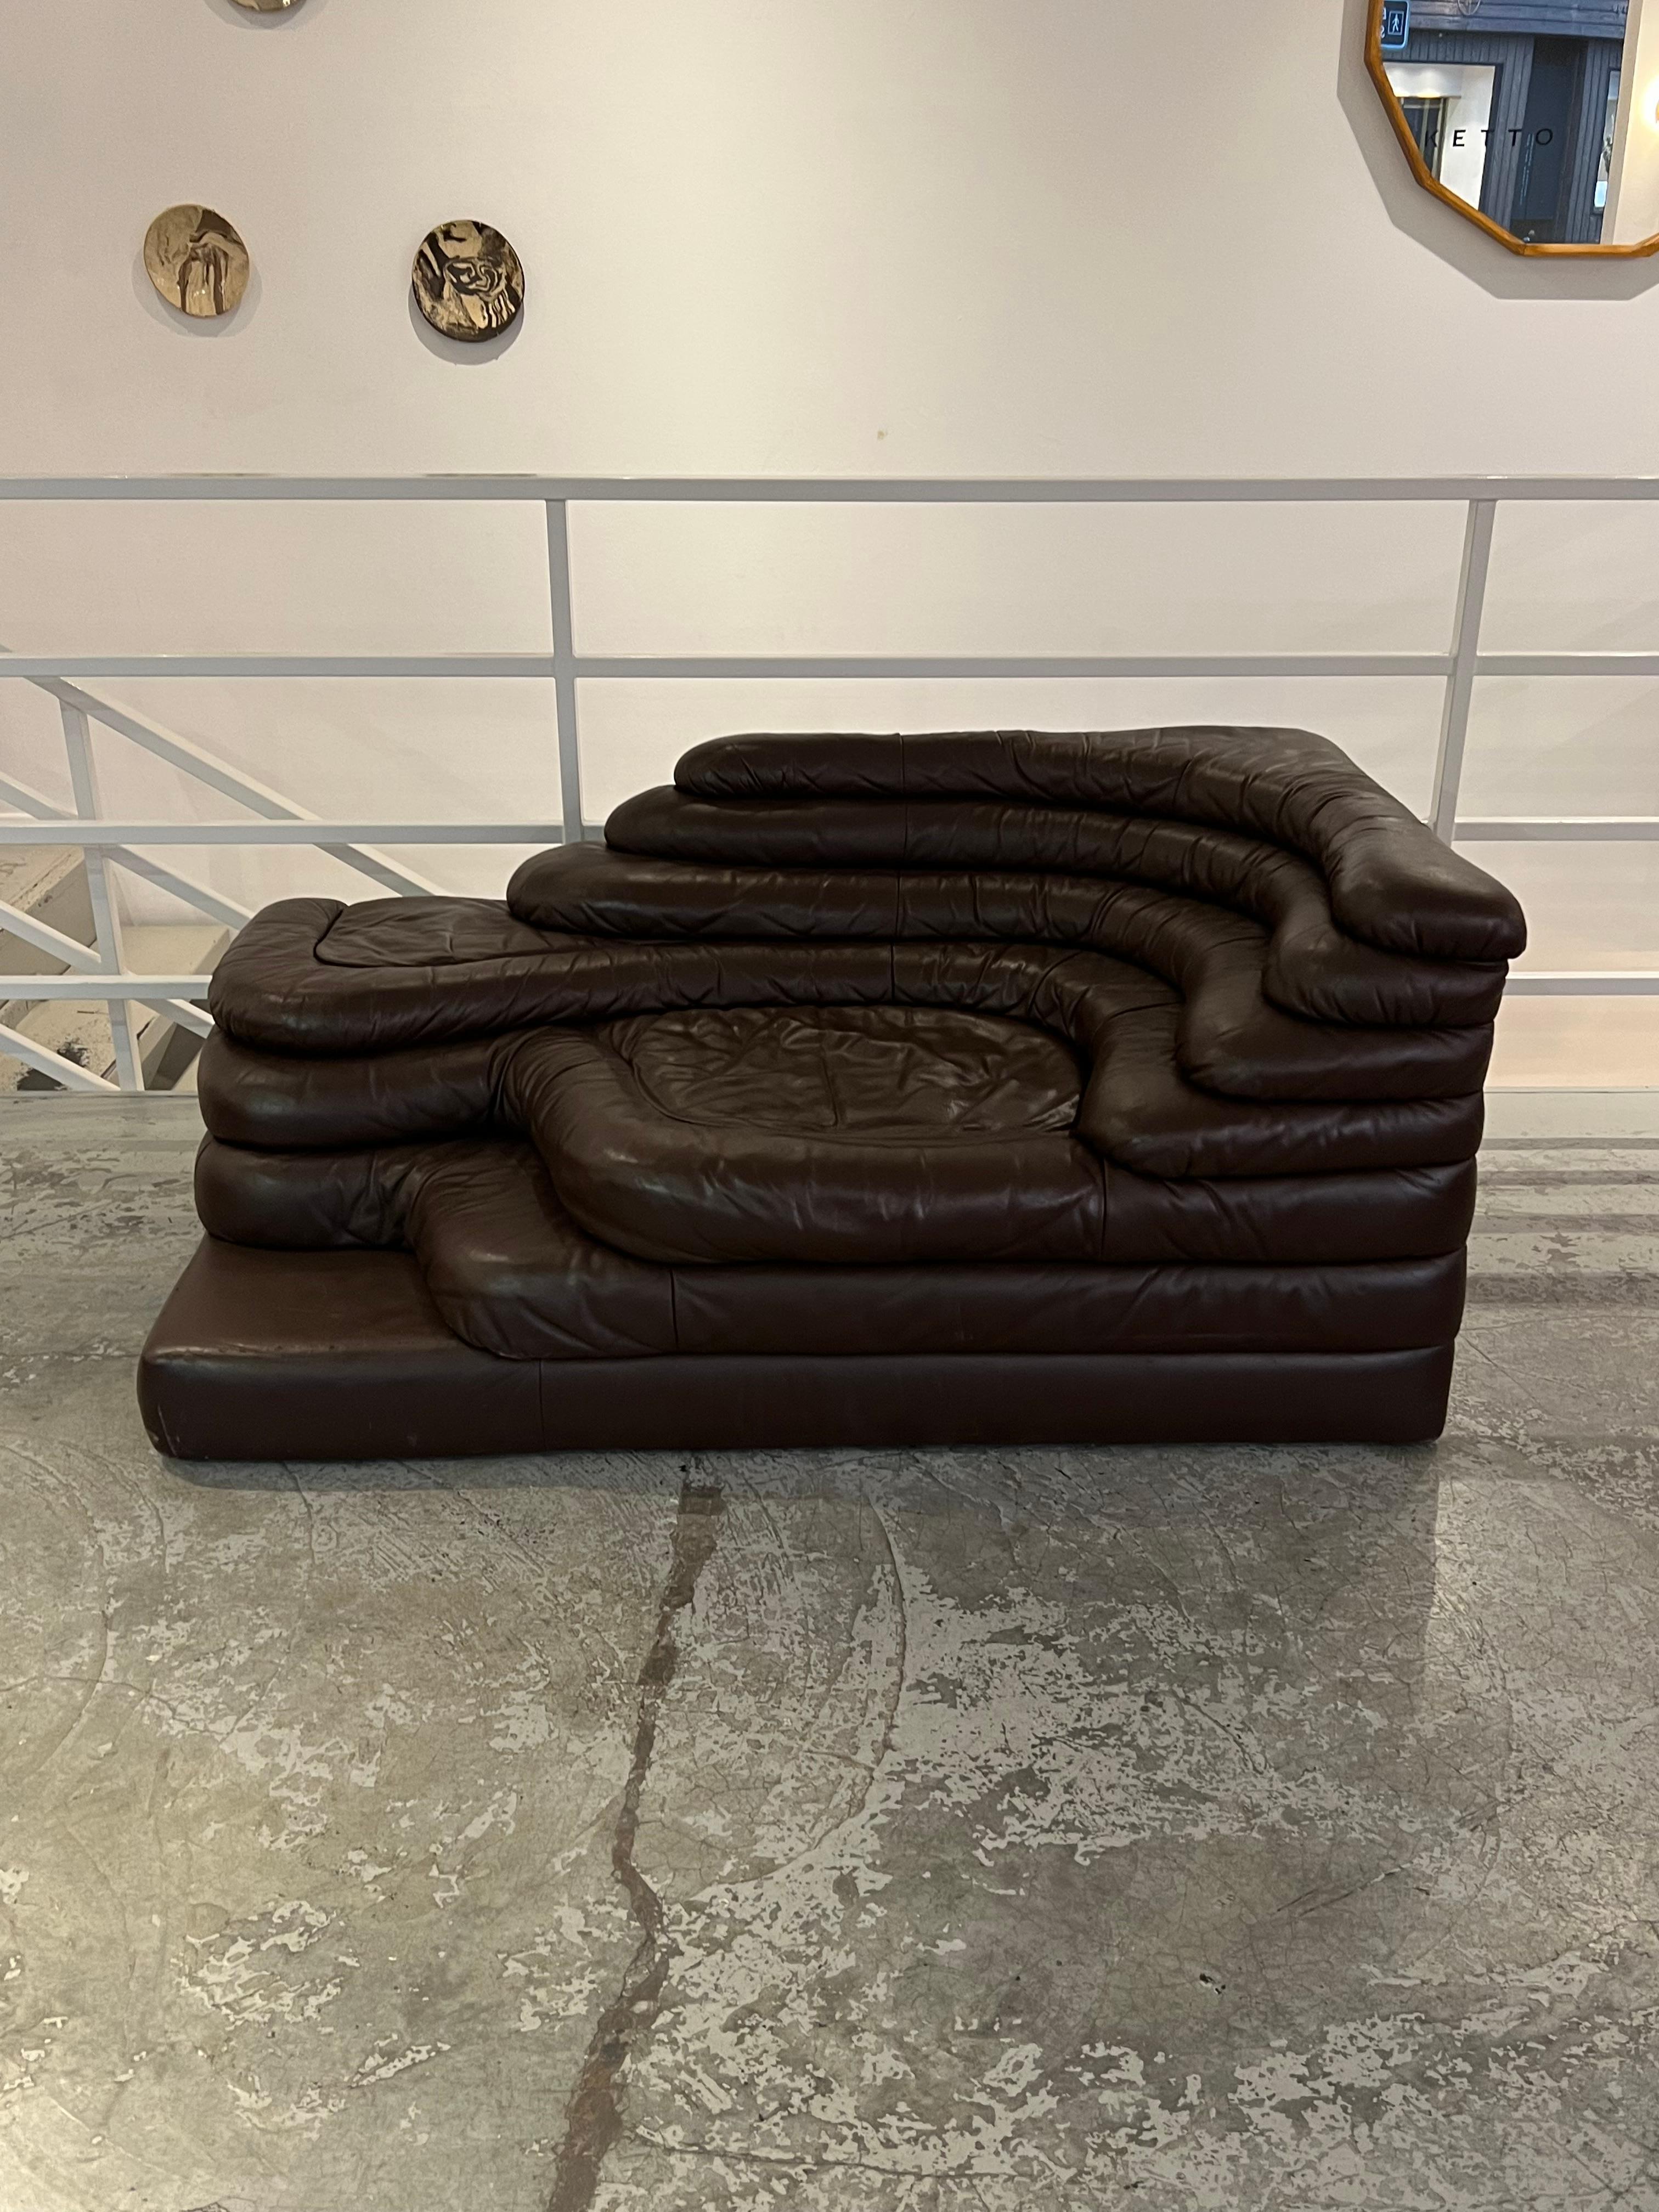 Pair of Terrazza Sofas by Ubald Klug for De Sede, Switzerland, 1973 For Sale 1